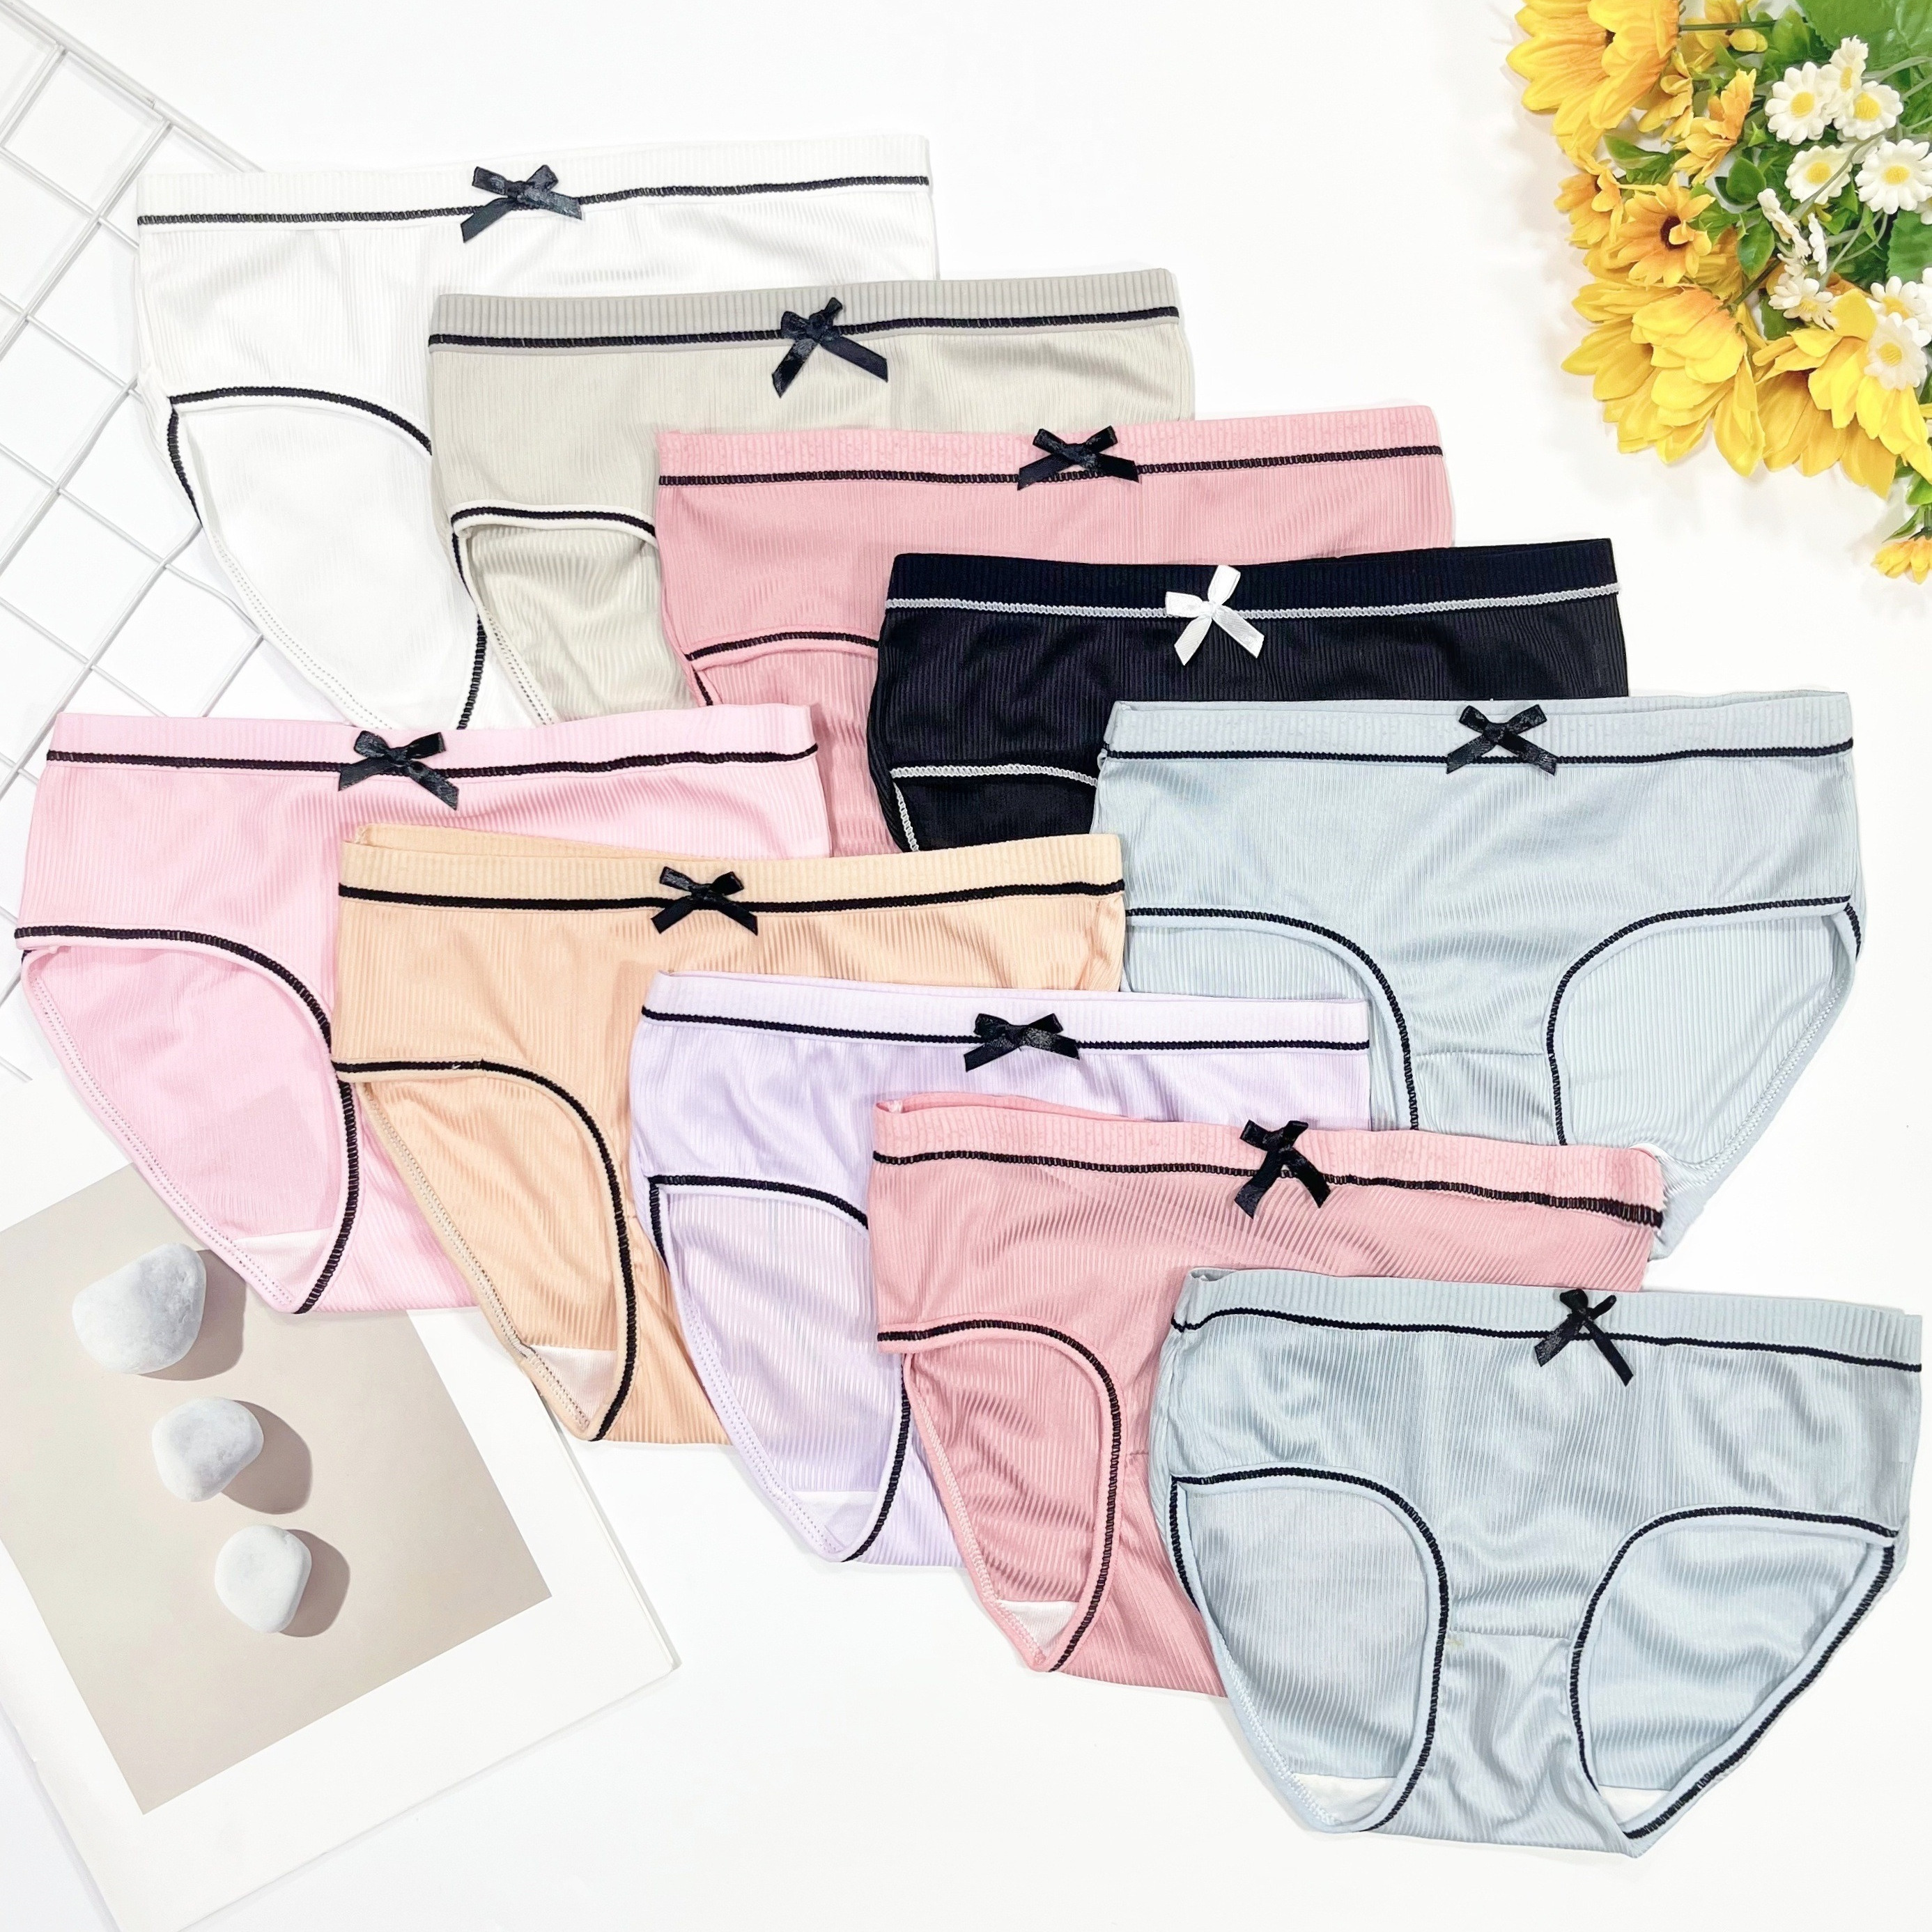 

10 Pcs Girl's Cute Bow Design Triangle Briefs, Soft & Comfy Underwear Set, For All Season Wearing